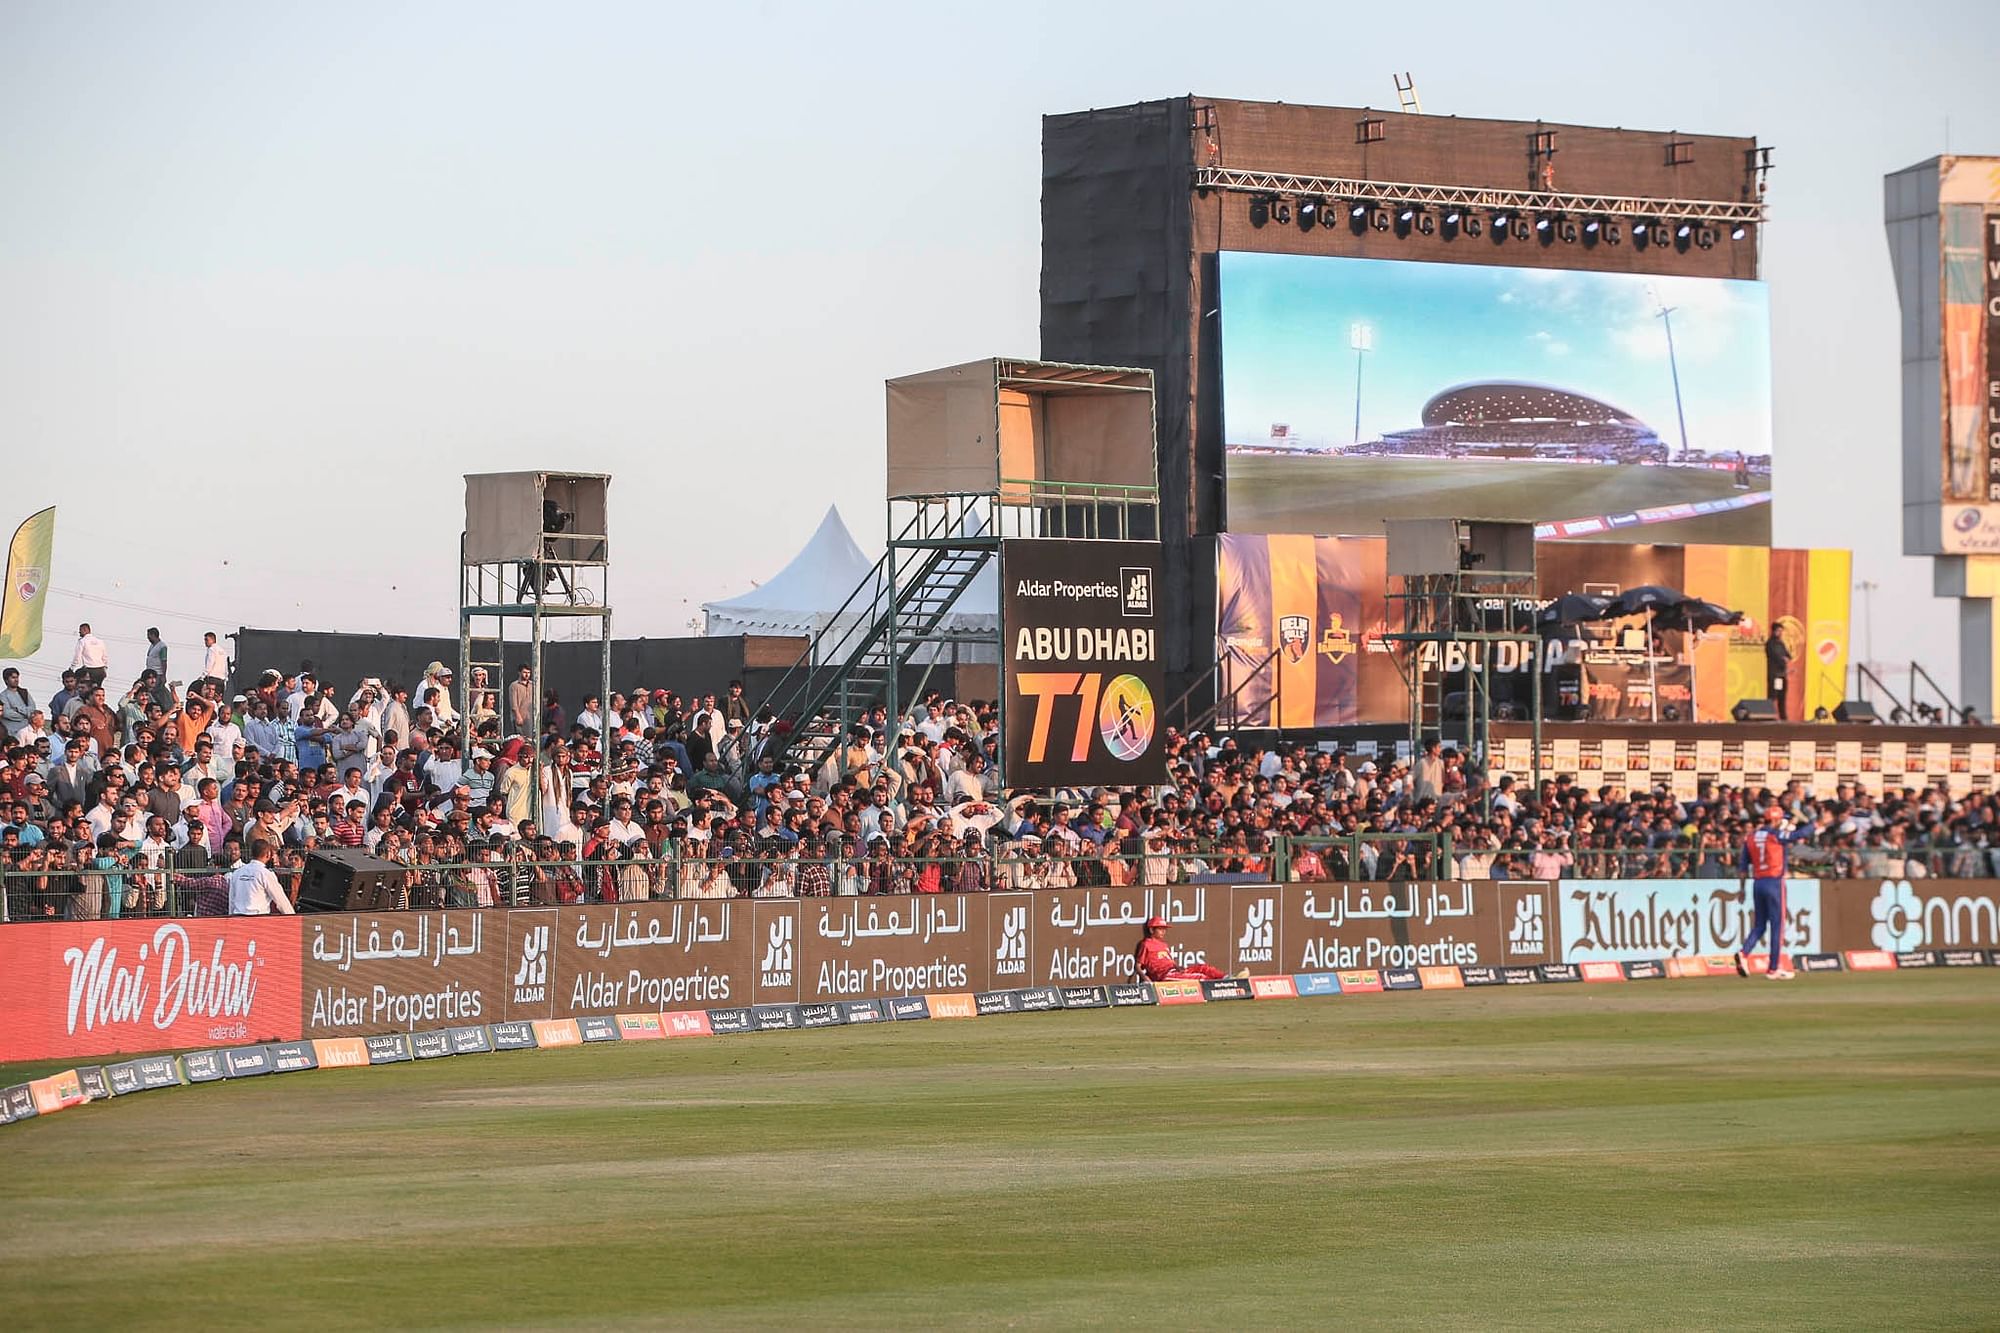 The third edition of the Abu Dhabi T10 League was held from 15 November to 24 November.